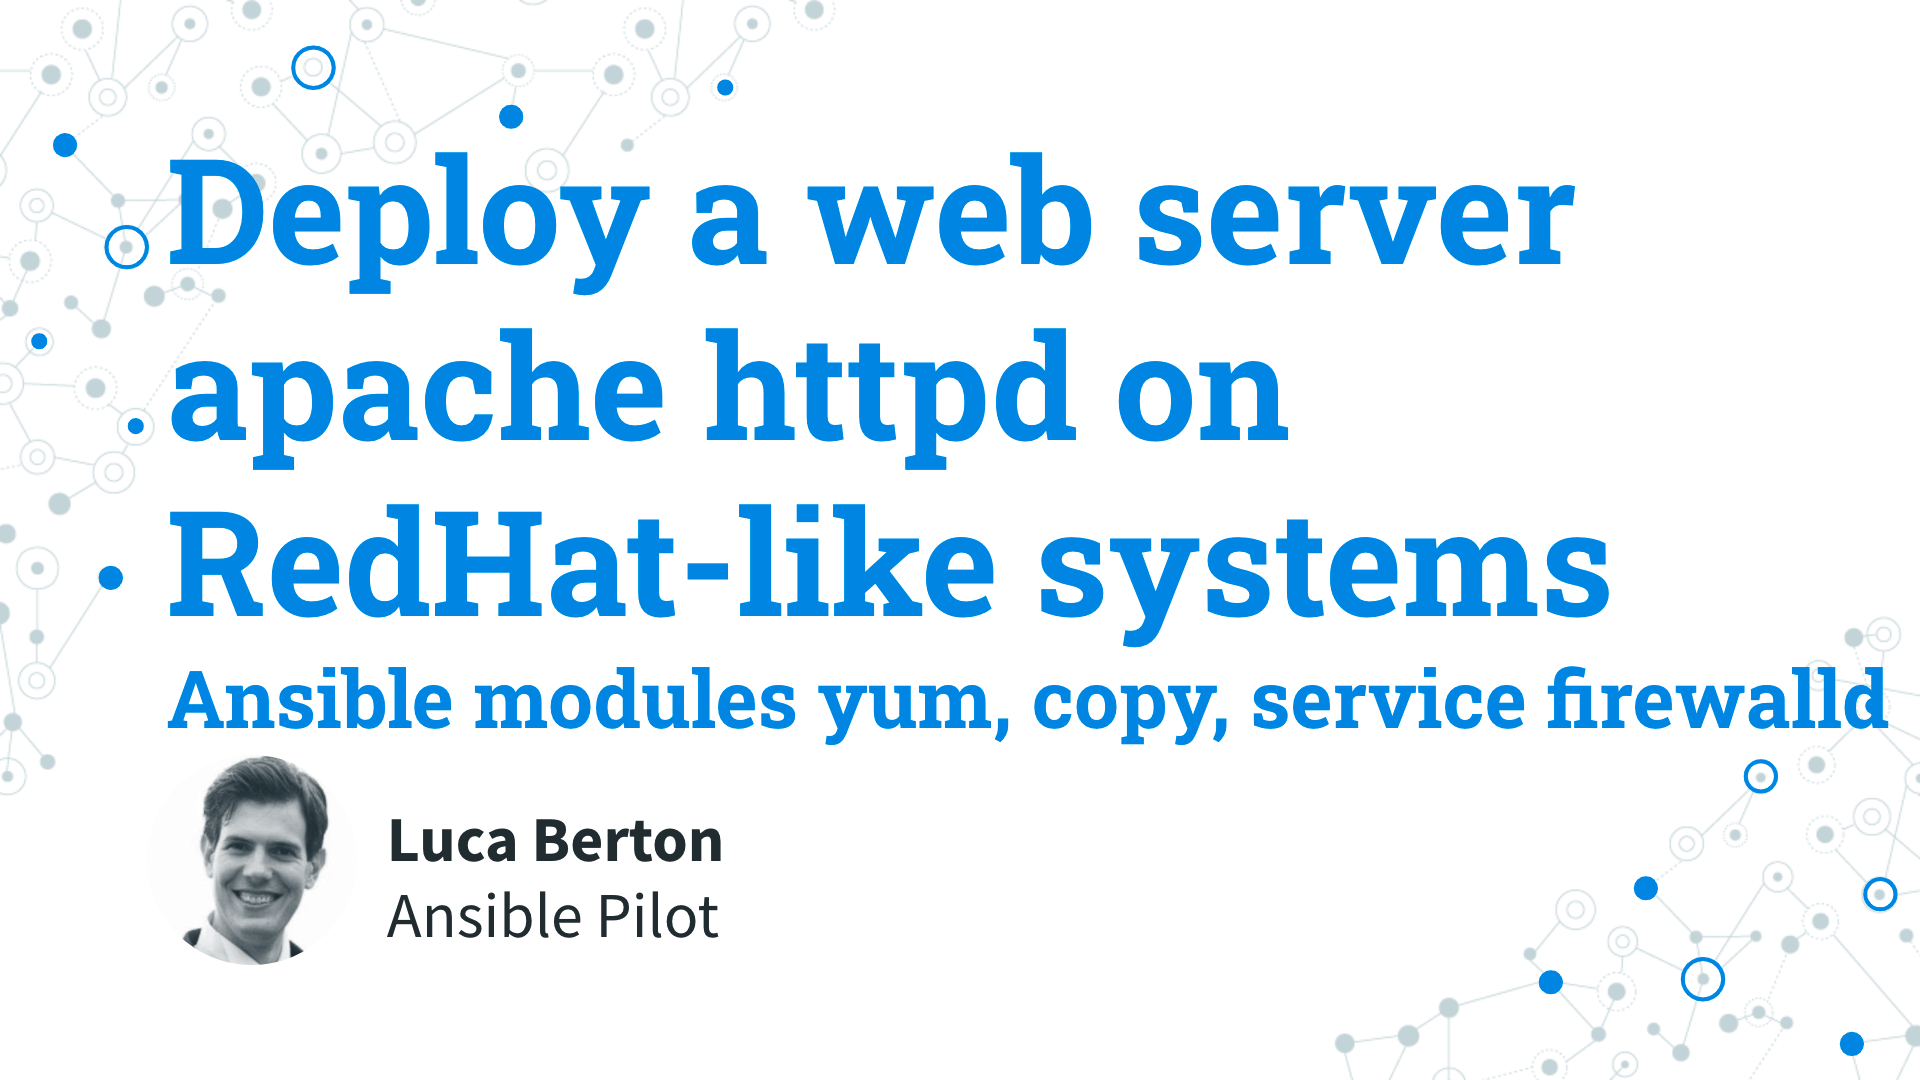 Deploy a web server apache httpd on RedHat-like systems - Ansible modules yum, copy, service firewalld